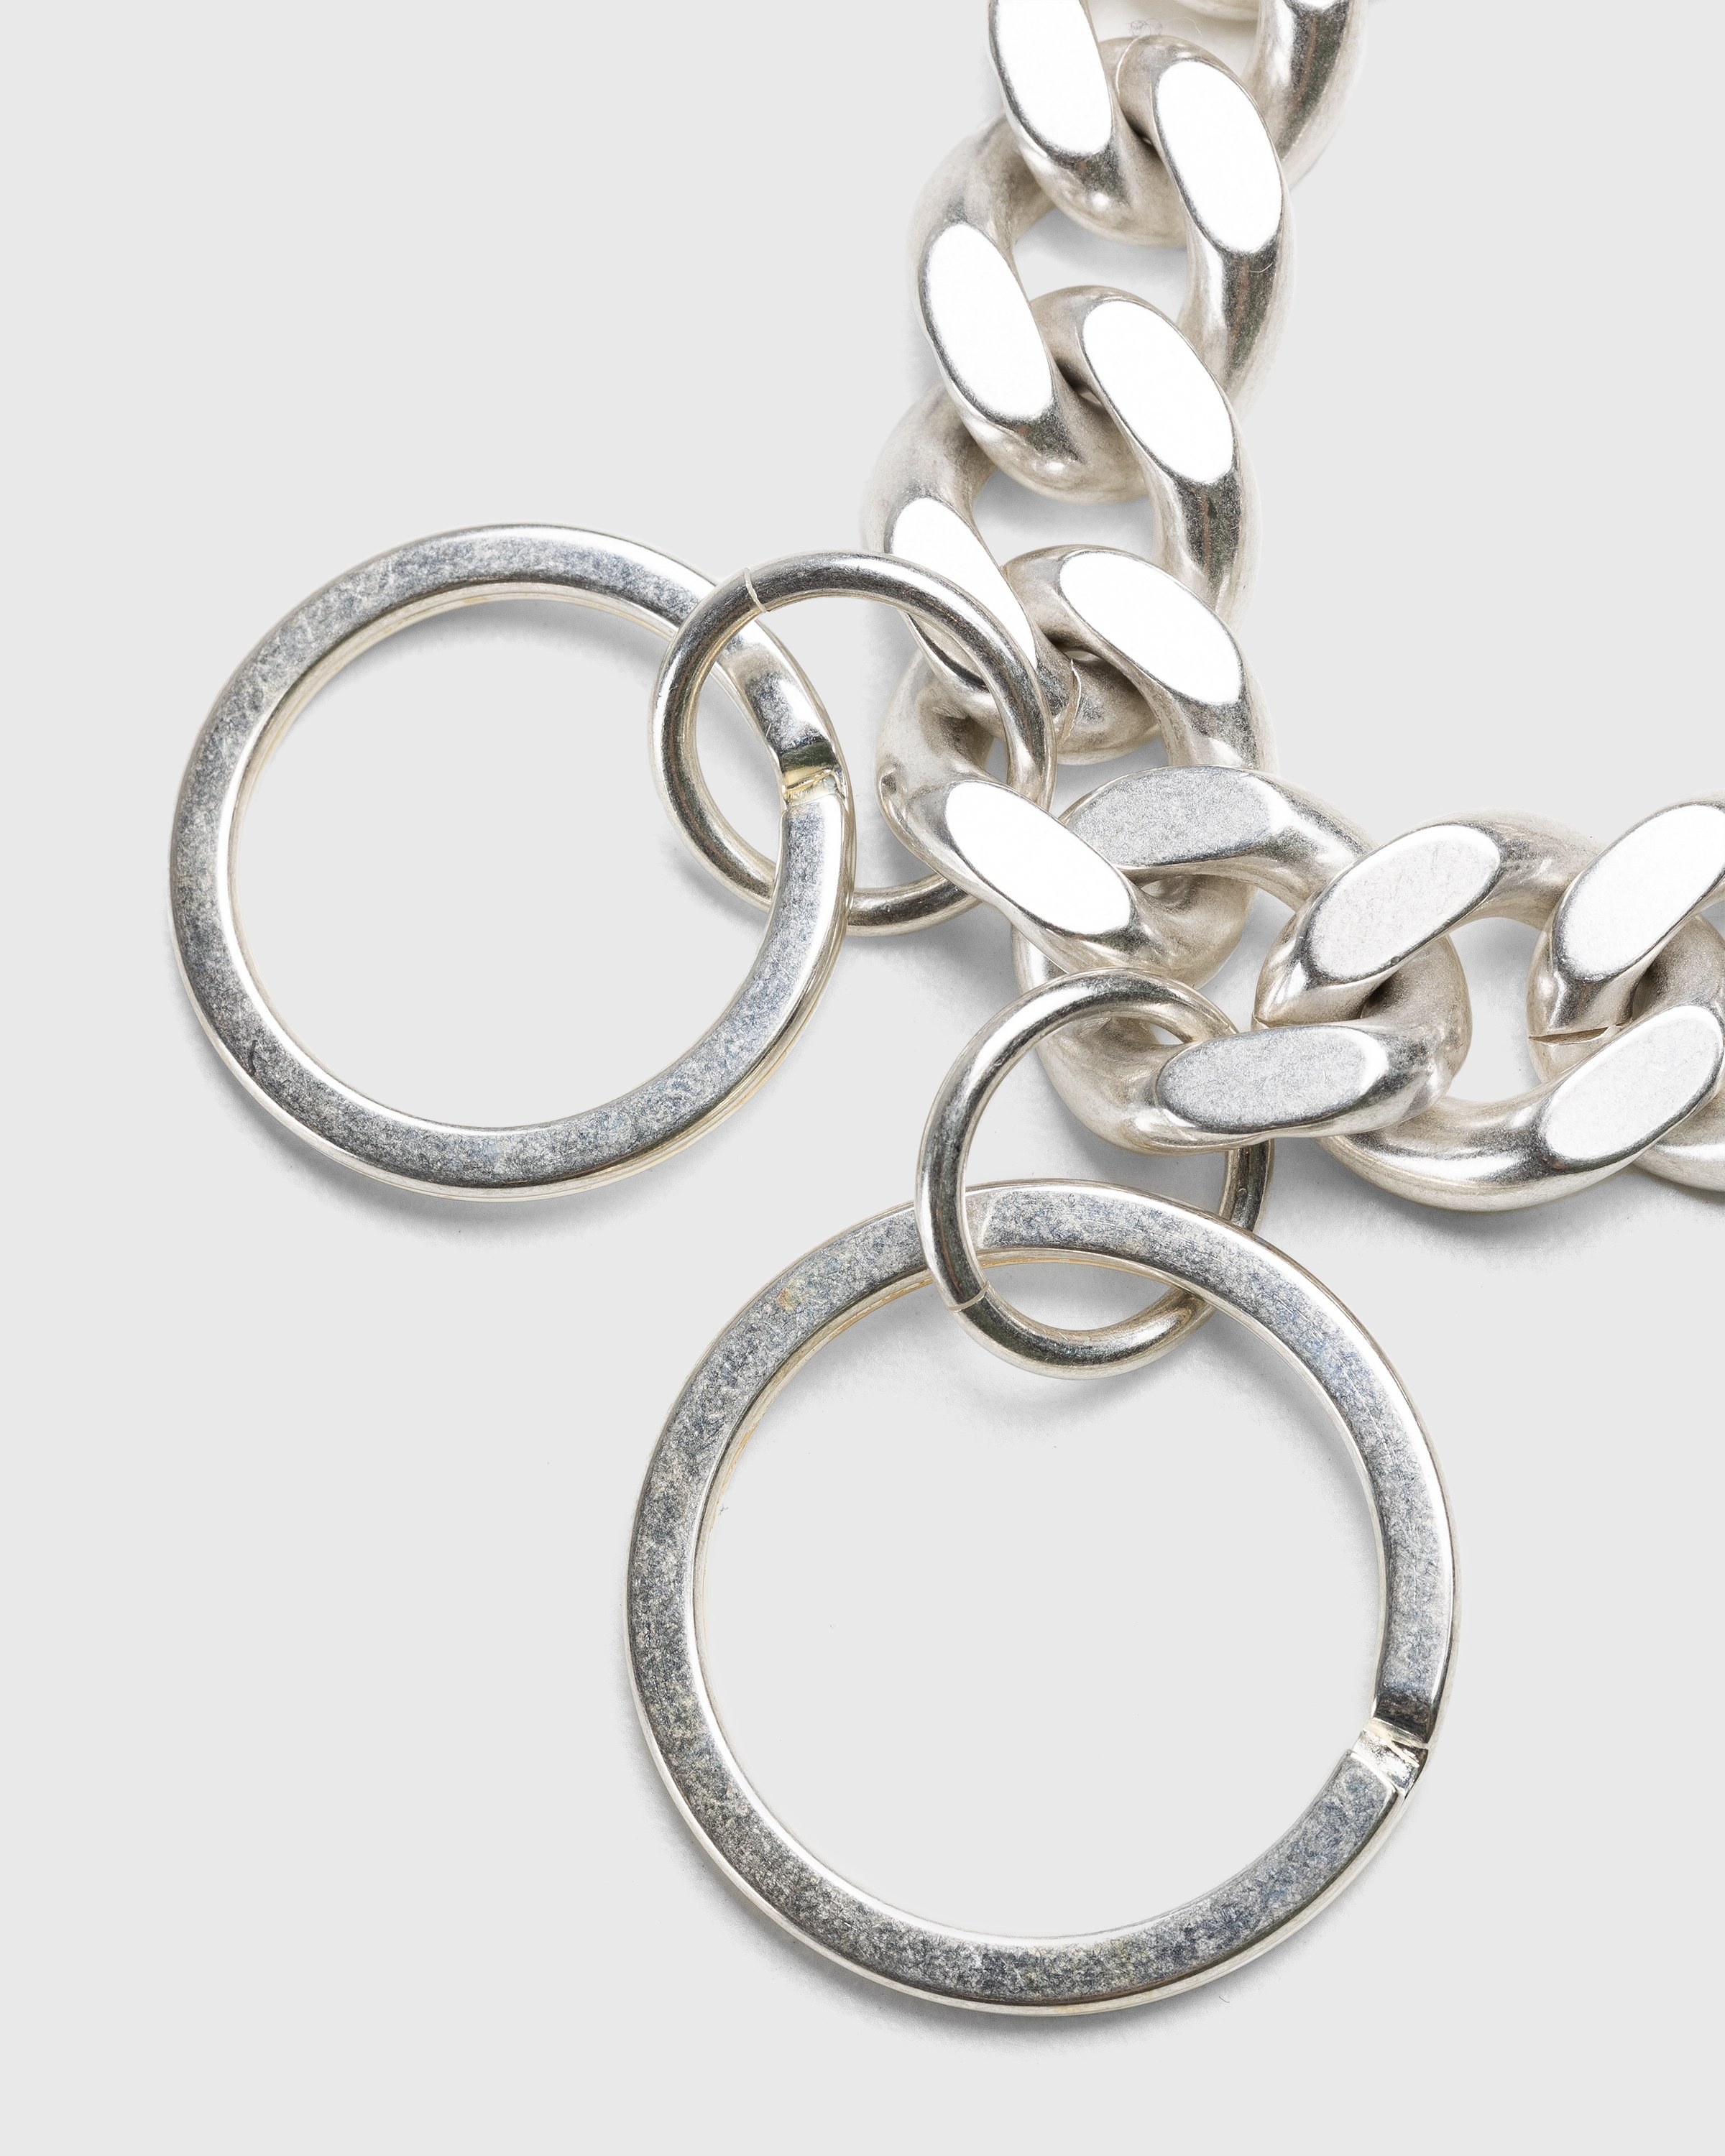 Jil Sander – Chain Link Key Ring Silver - Keychains - Silver - Image 2